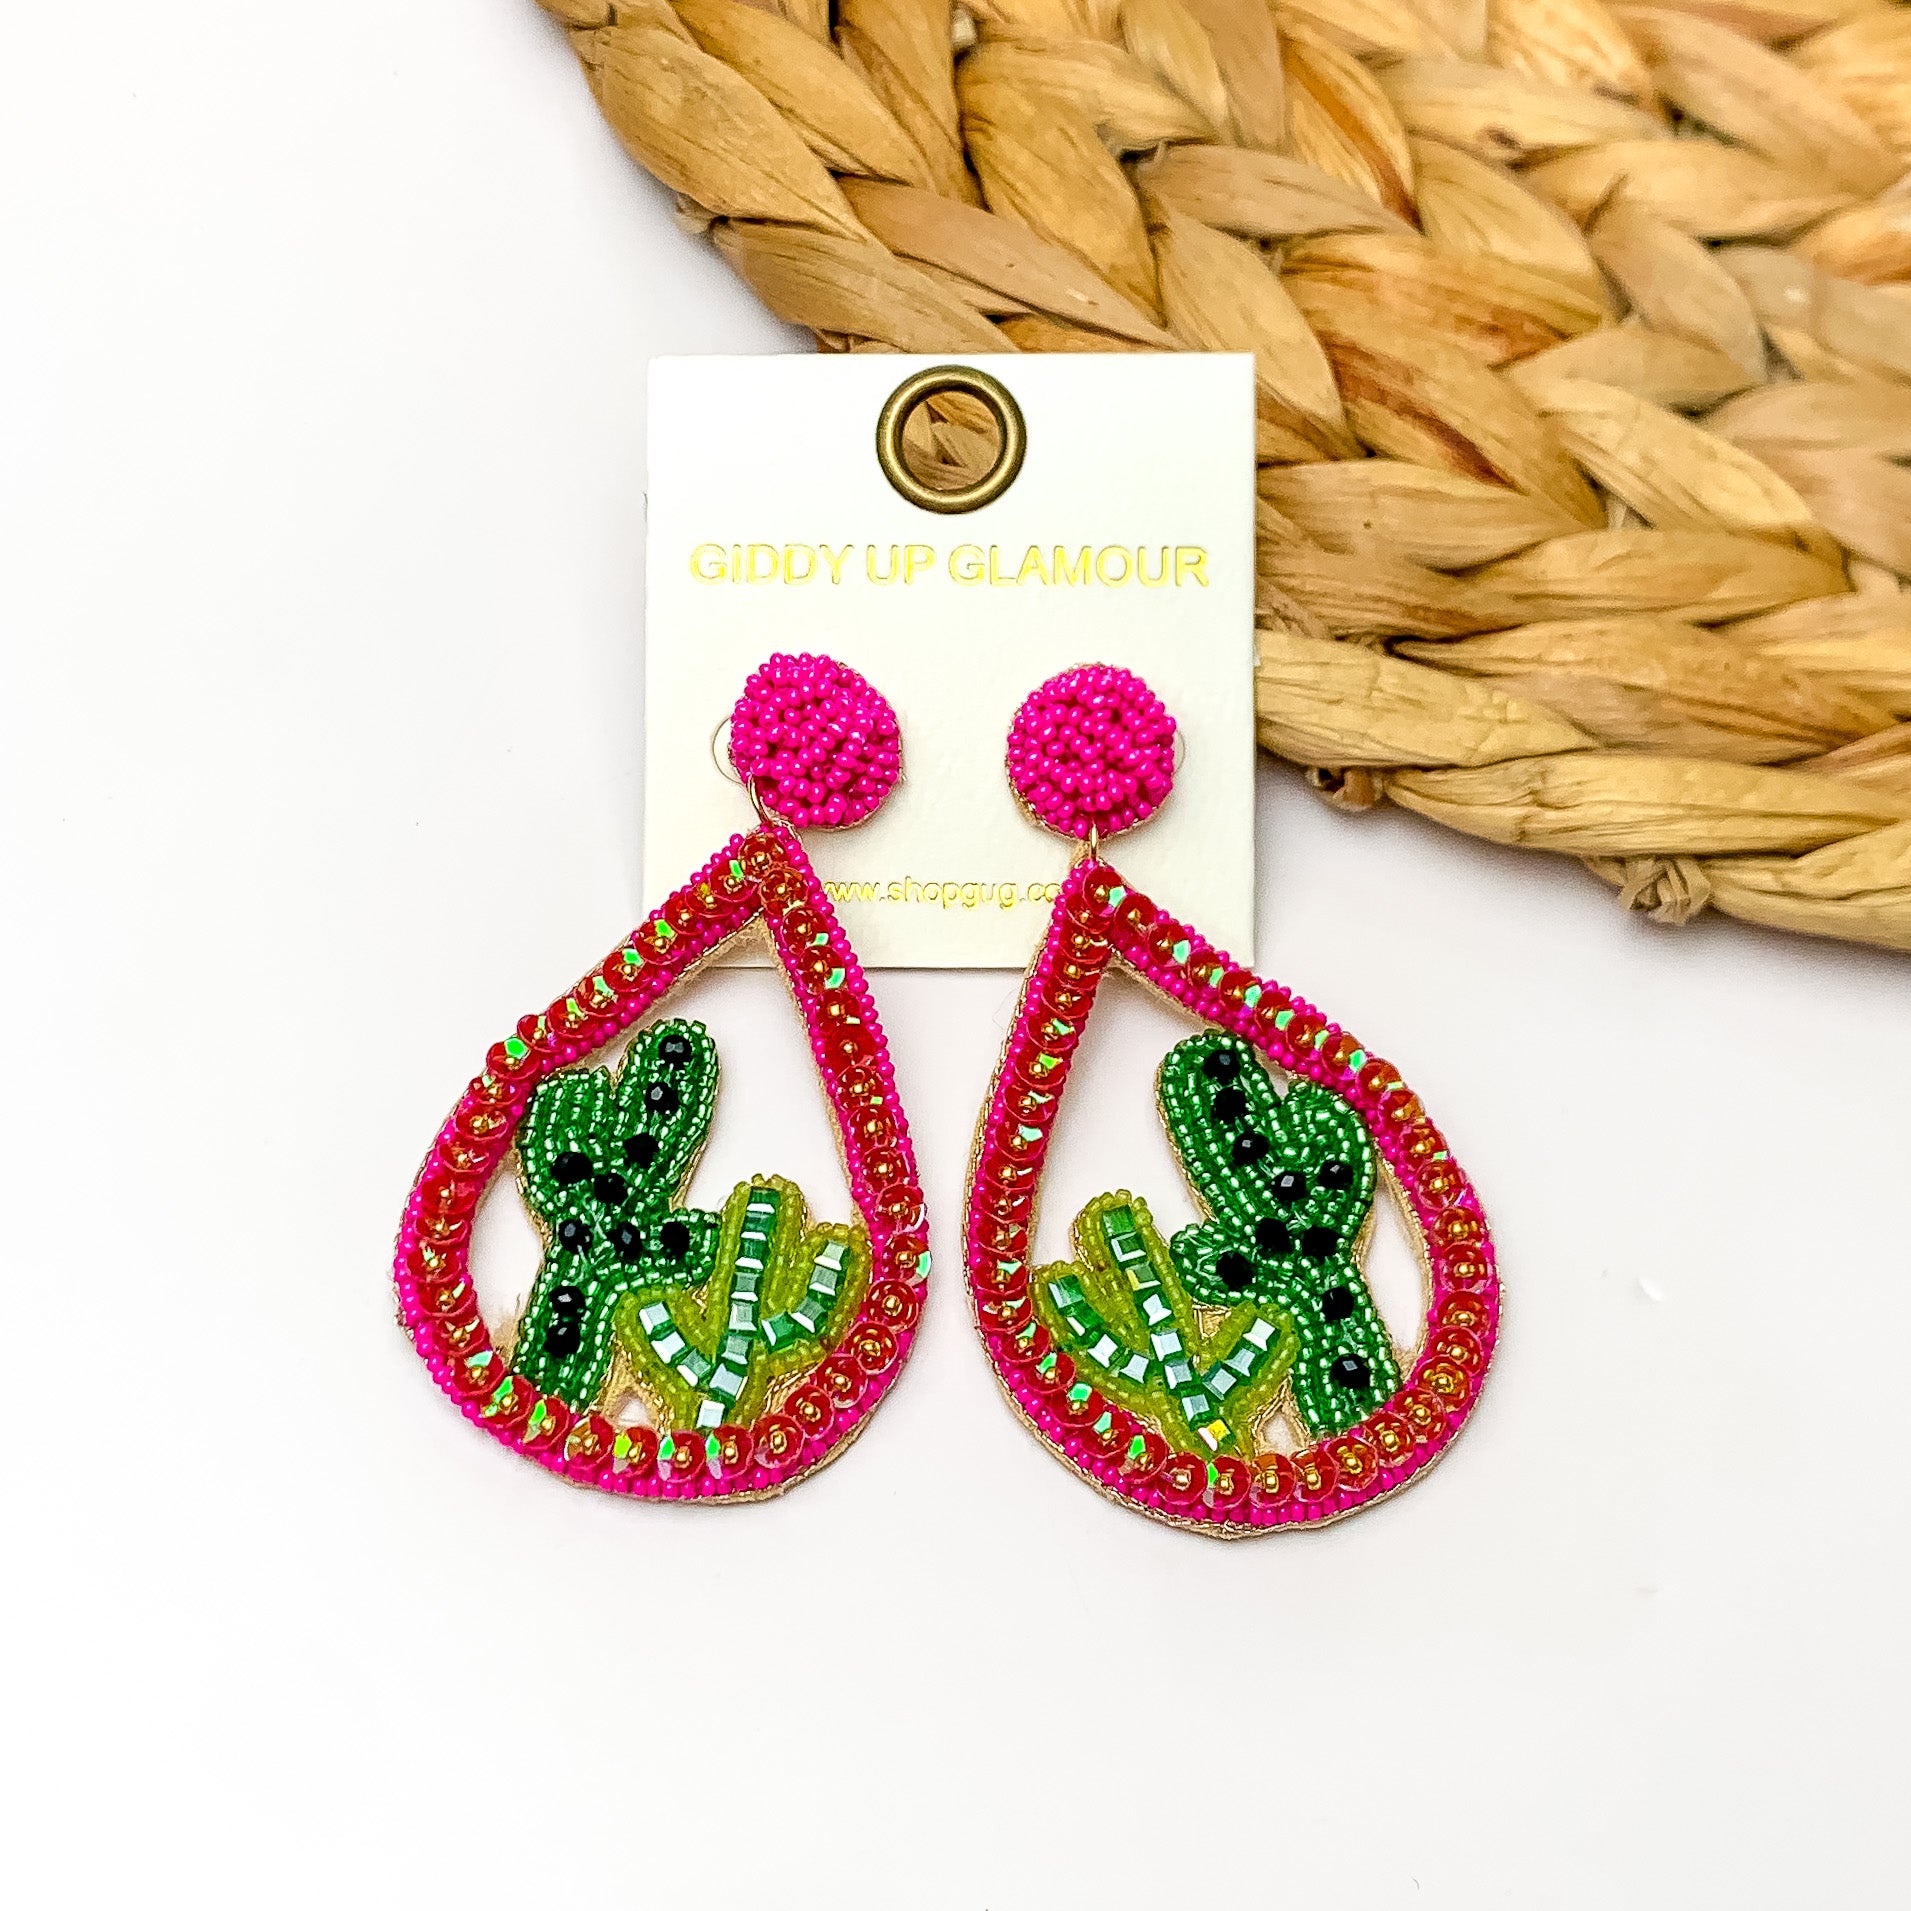 Beaded Open Teardrop Earrings With Cactus Scene on the Inside in Hot Pink. Pictured on a white background with a brown decoration in the top right corner.